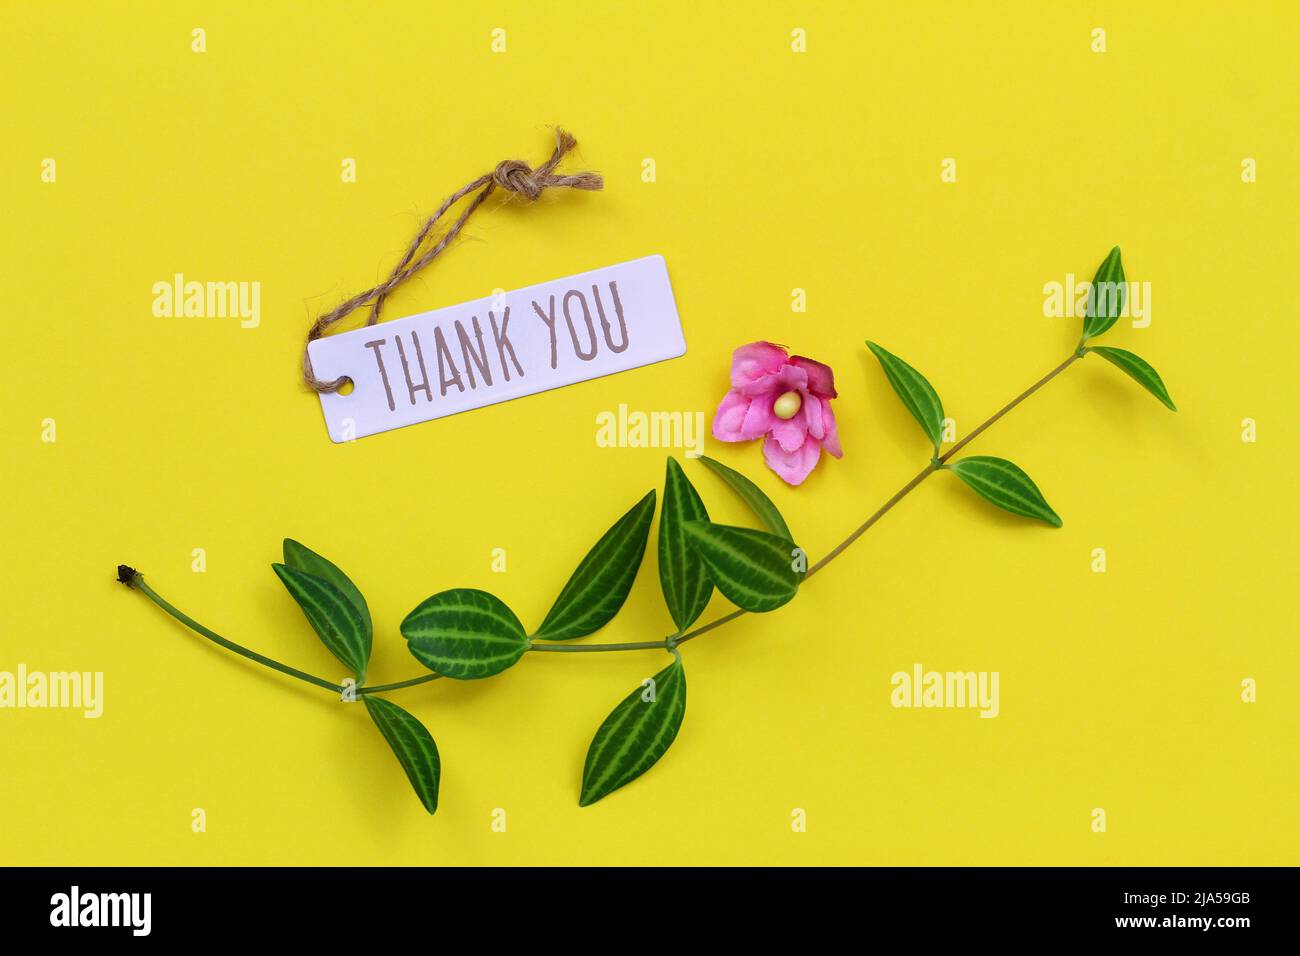 Thank you tag on vivid yellow background with green leaves and pink flower Stock Photo